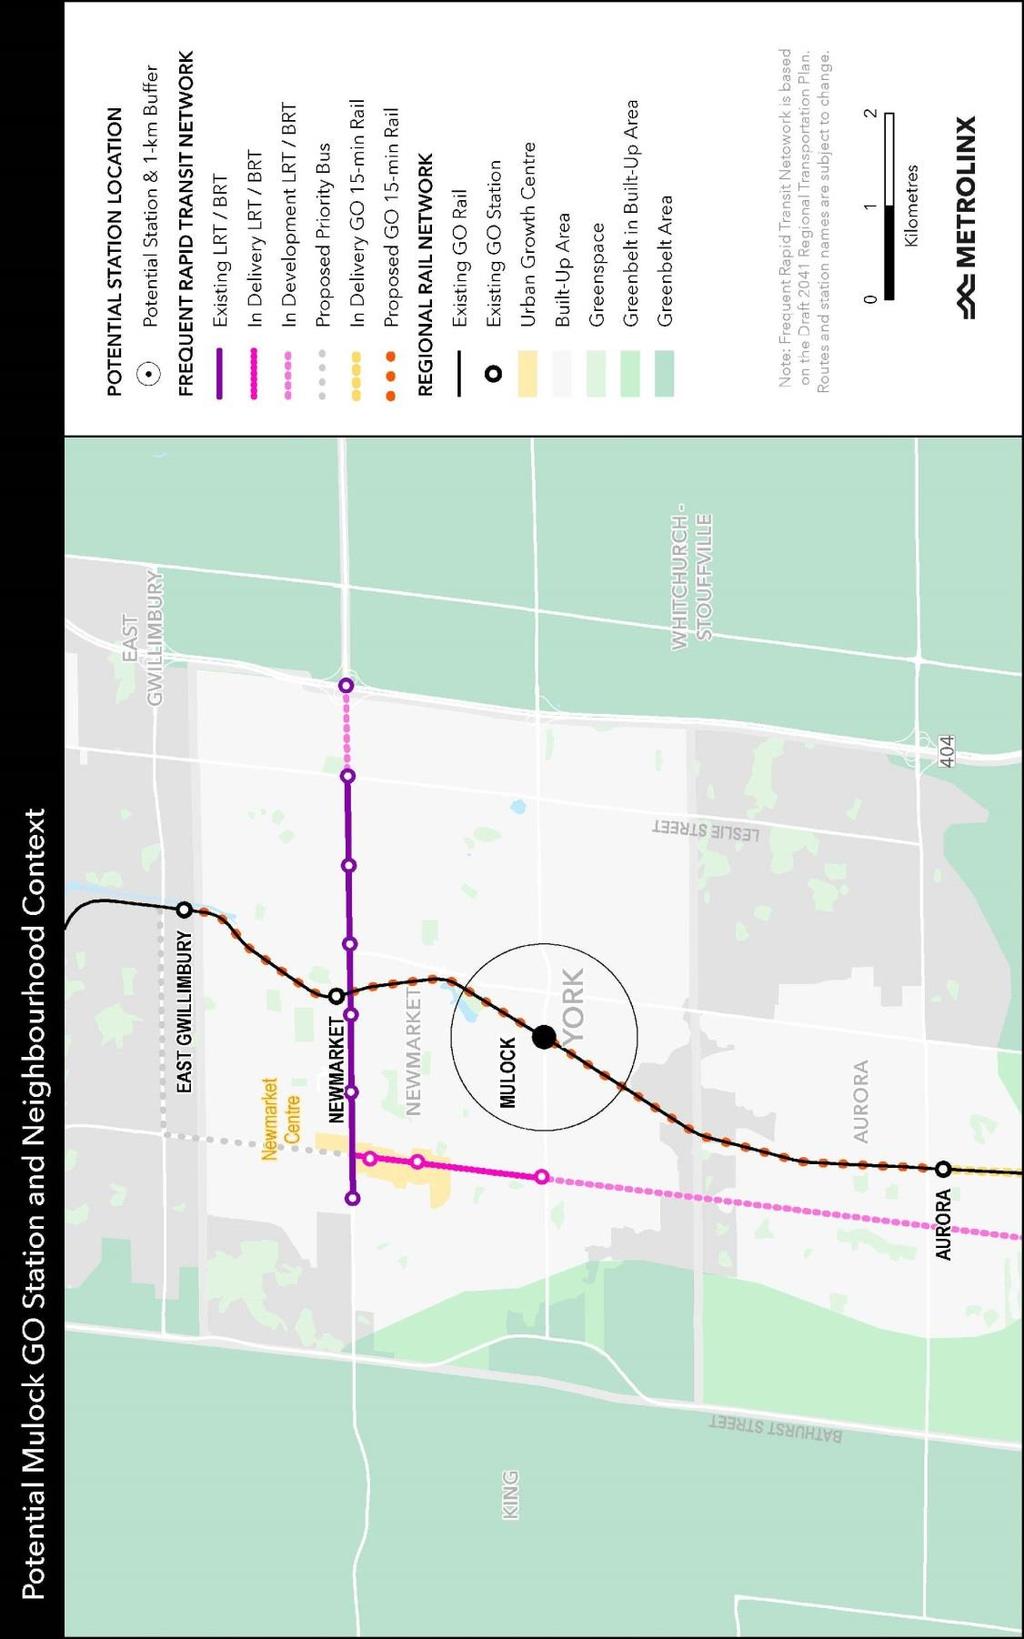 10.4 Proposed GO Station and Neighbourhood Context Area